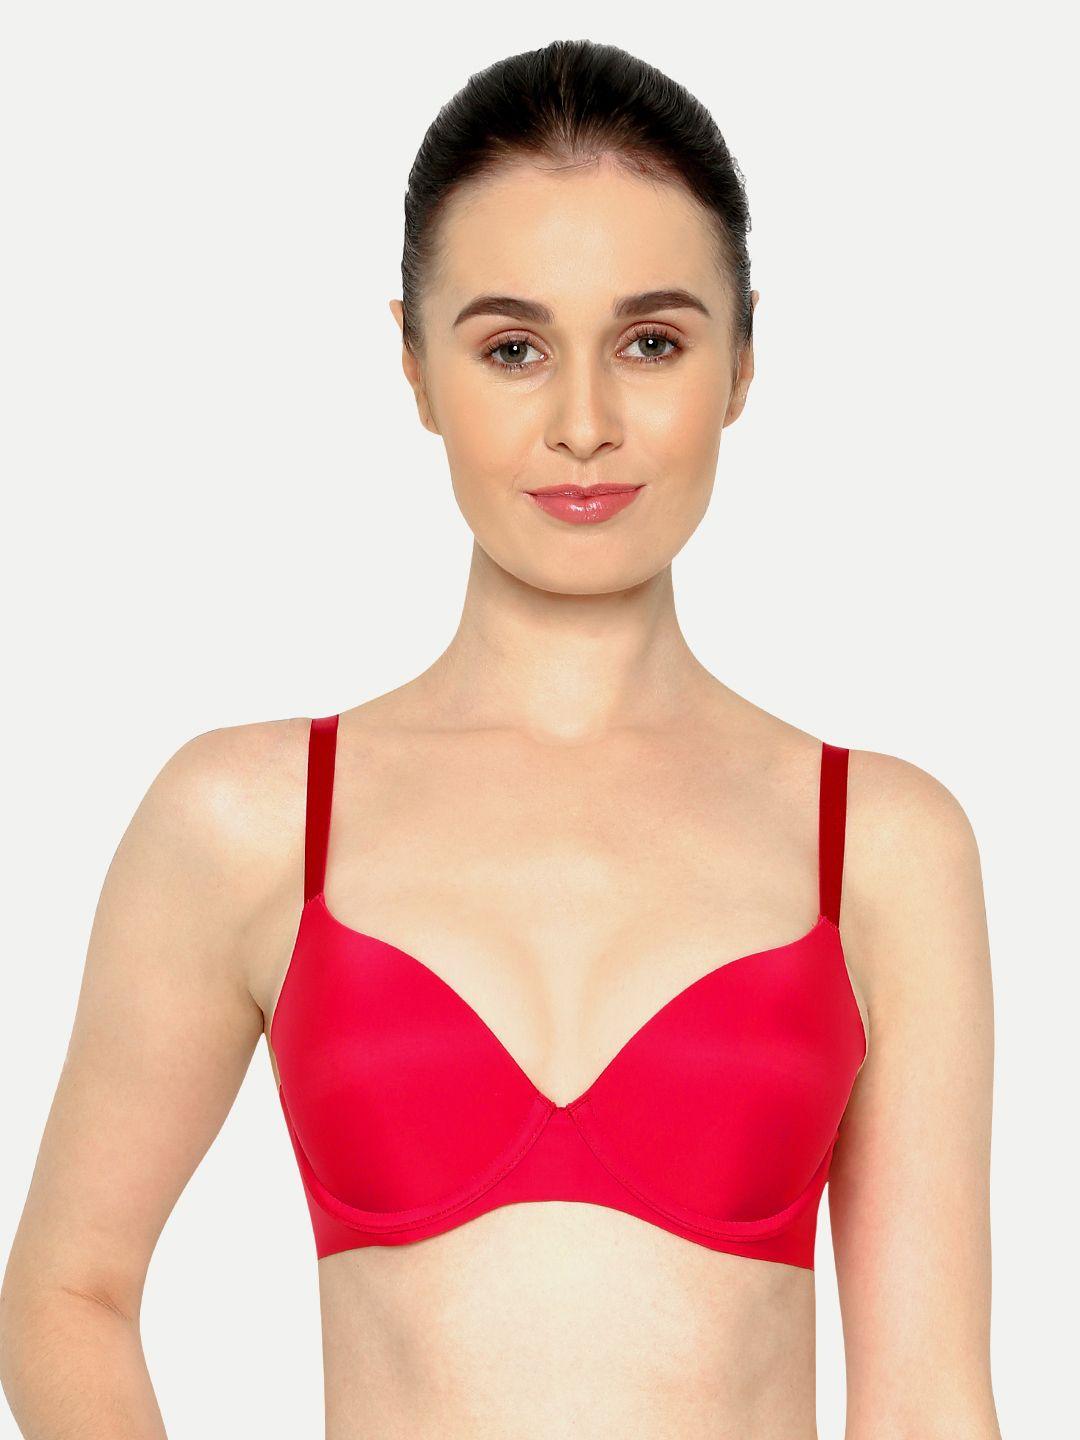 triumph maximizer 154 wired comfortable half cup body make-up push-up bra